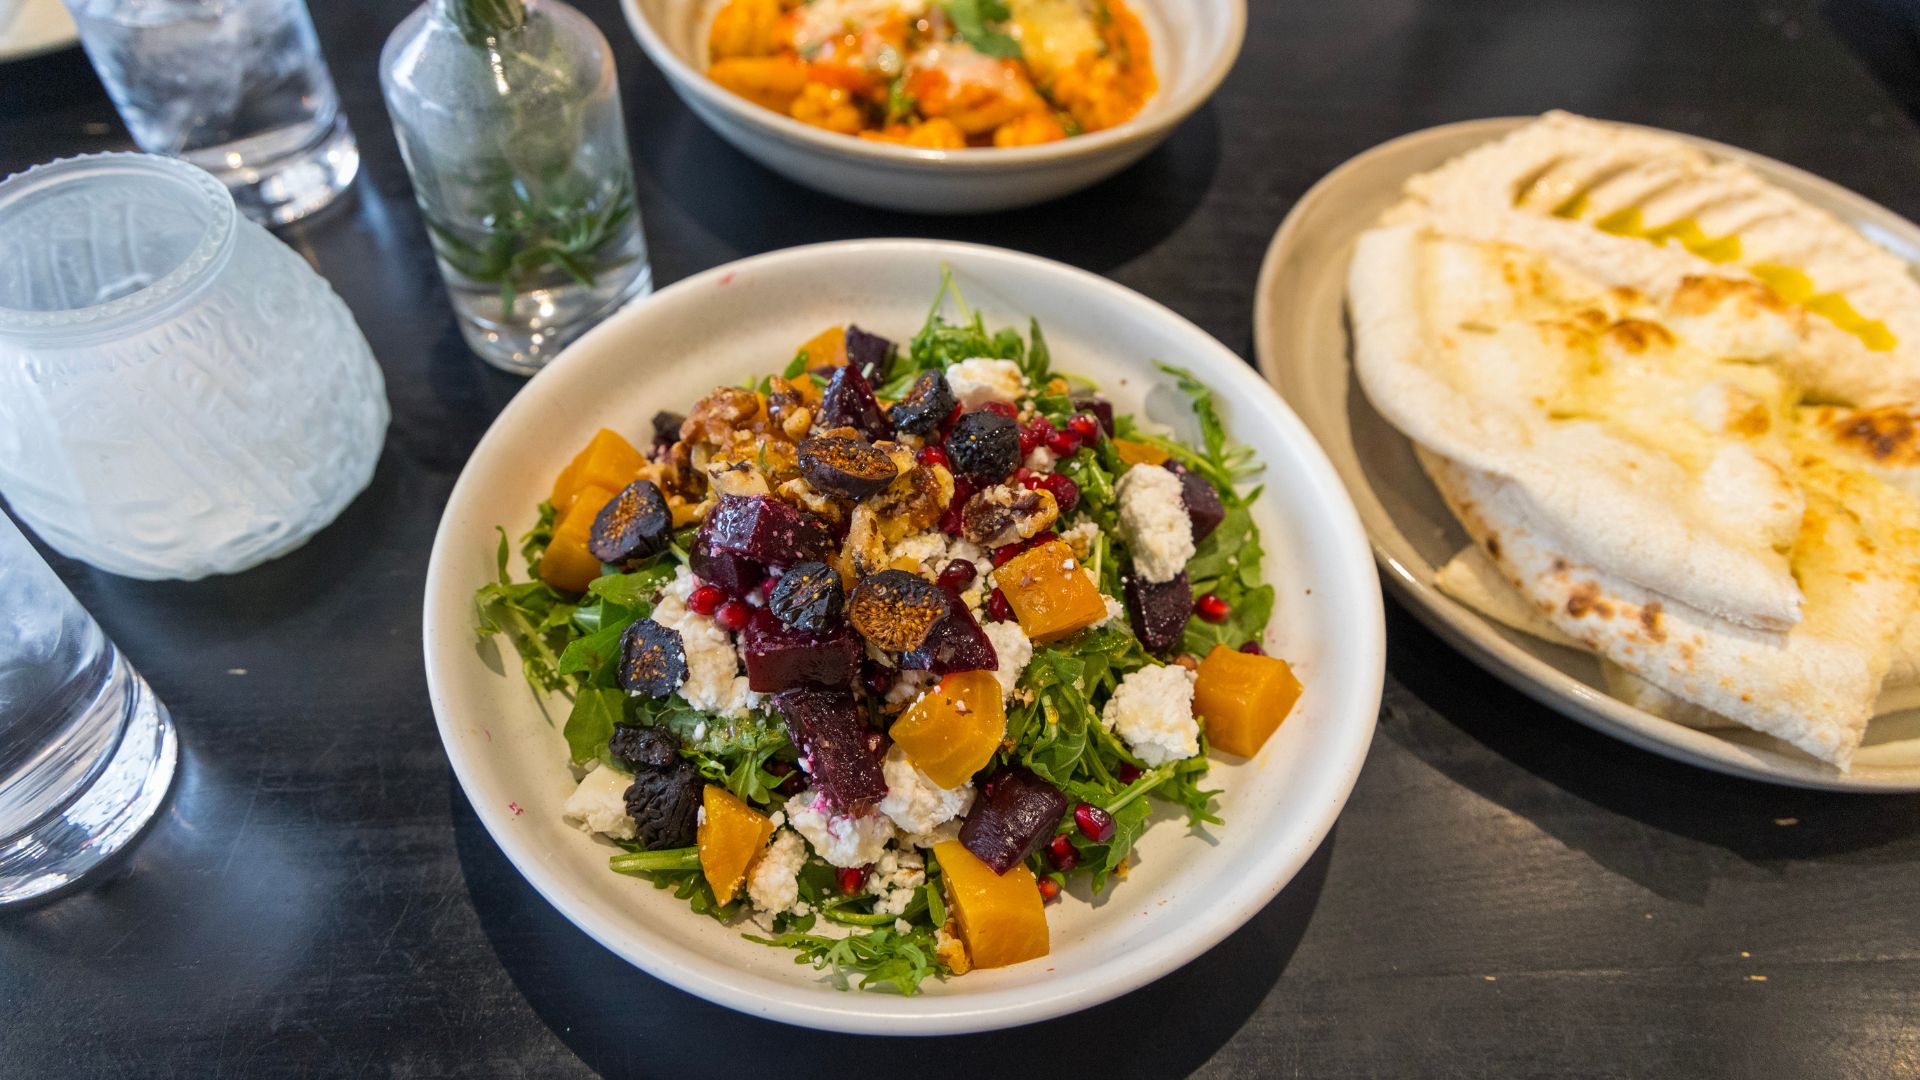 Katie's Pizza and Pasta Osteria serves a seasonal fig and beet salad.